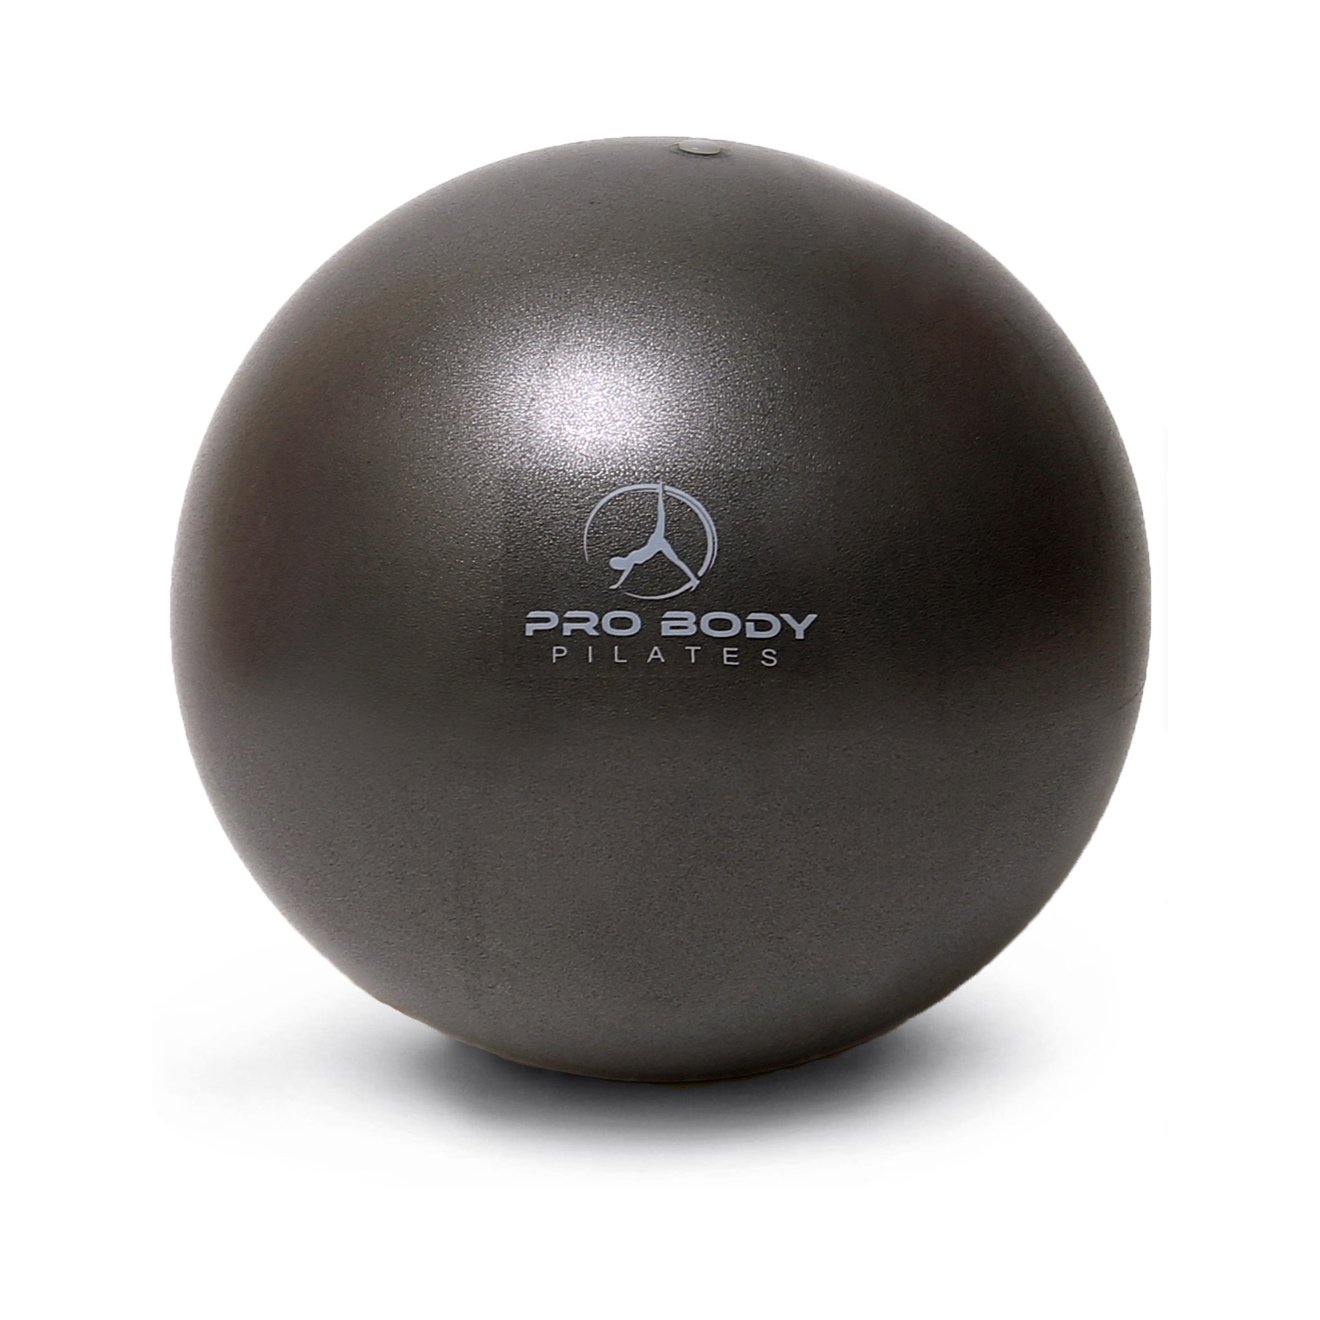 9 Inch Small Exercise Ball for Stability, Barre, Pilates, Yoga